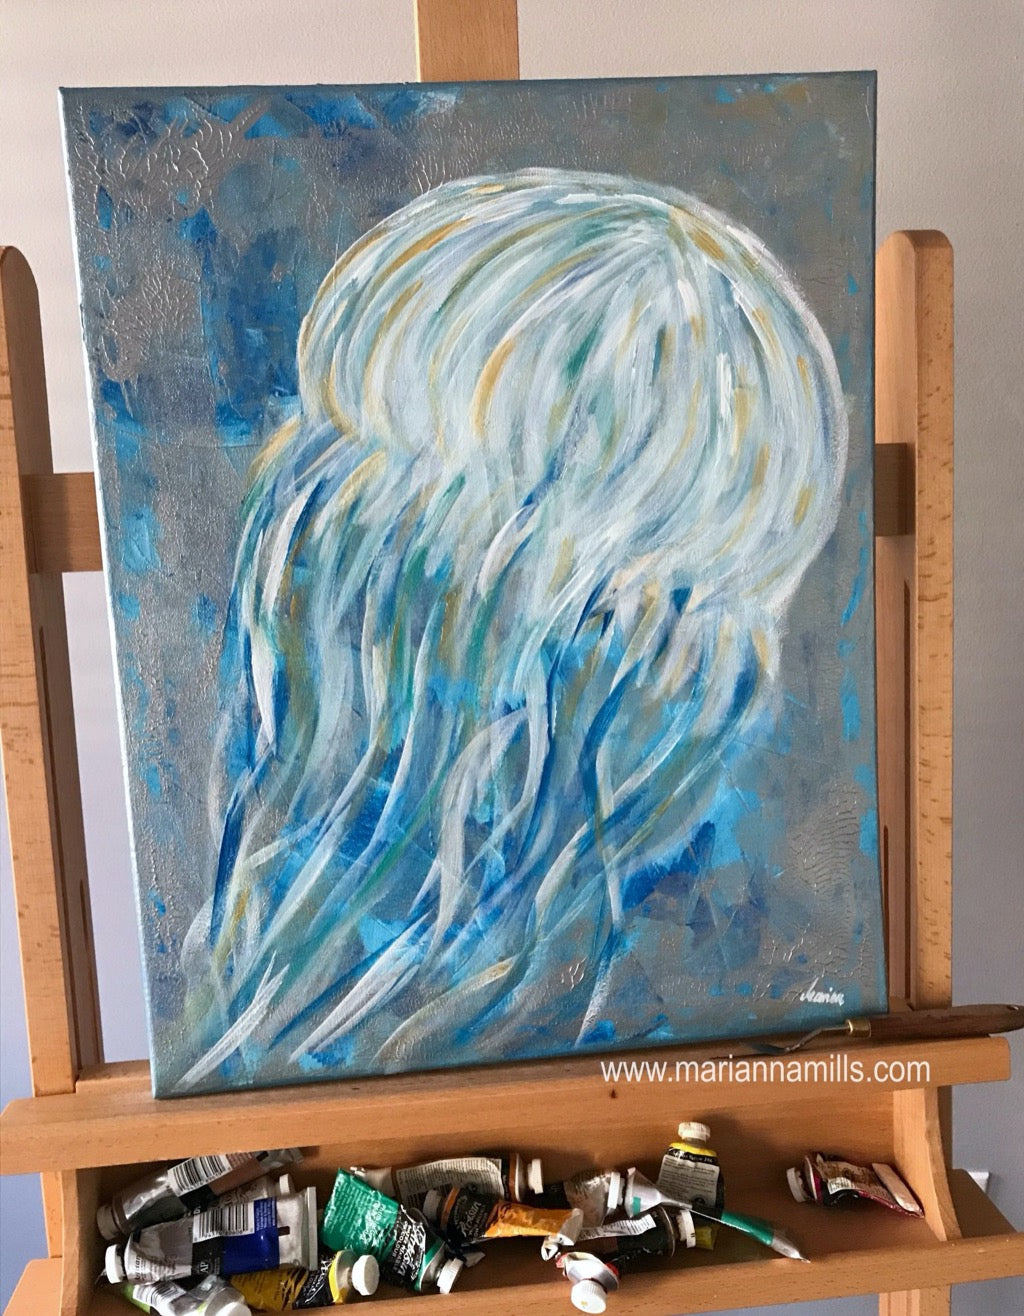 original acrylic impasto surreal painting for sale by Hungarian visionary artist Marianna Mills. 20”x16” size. Title: Jelly is a beautiful contemporary fine art featuring a jellyfish with beautiful sea blue, green, white, silver and gold colors.